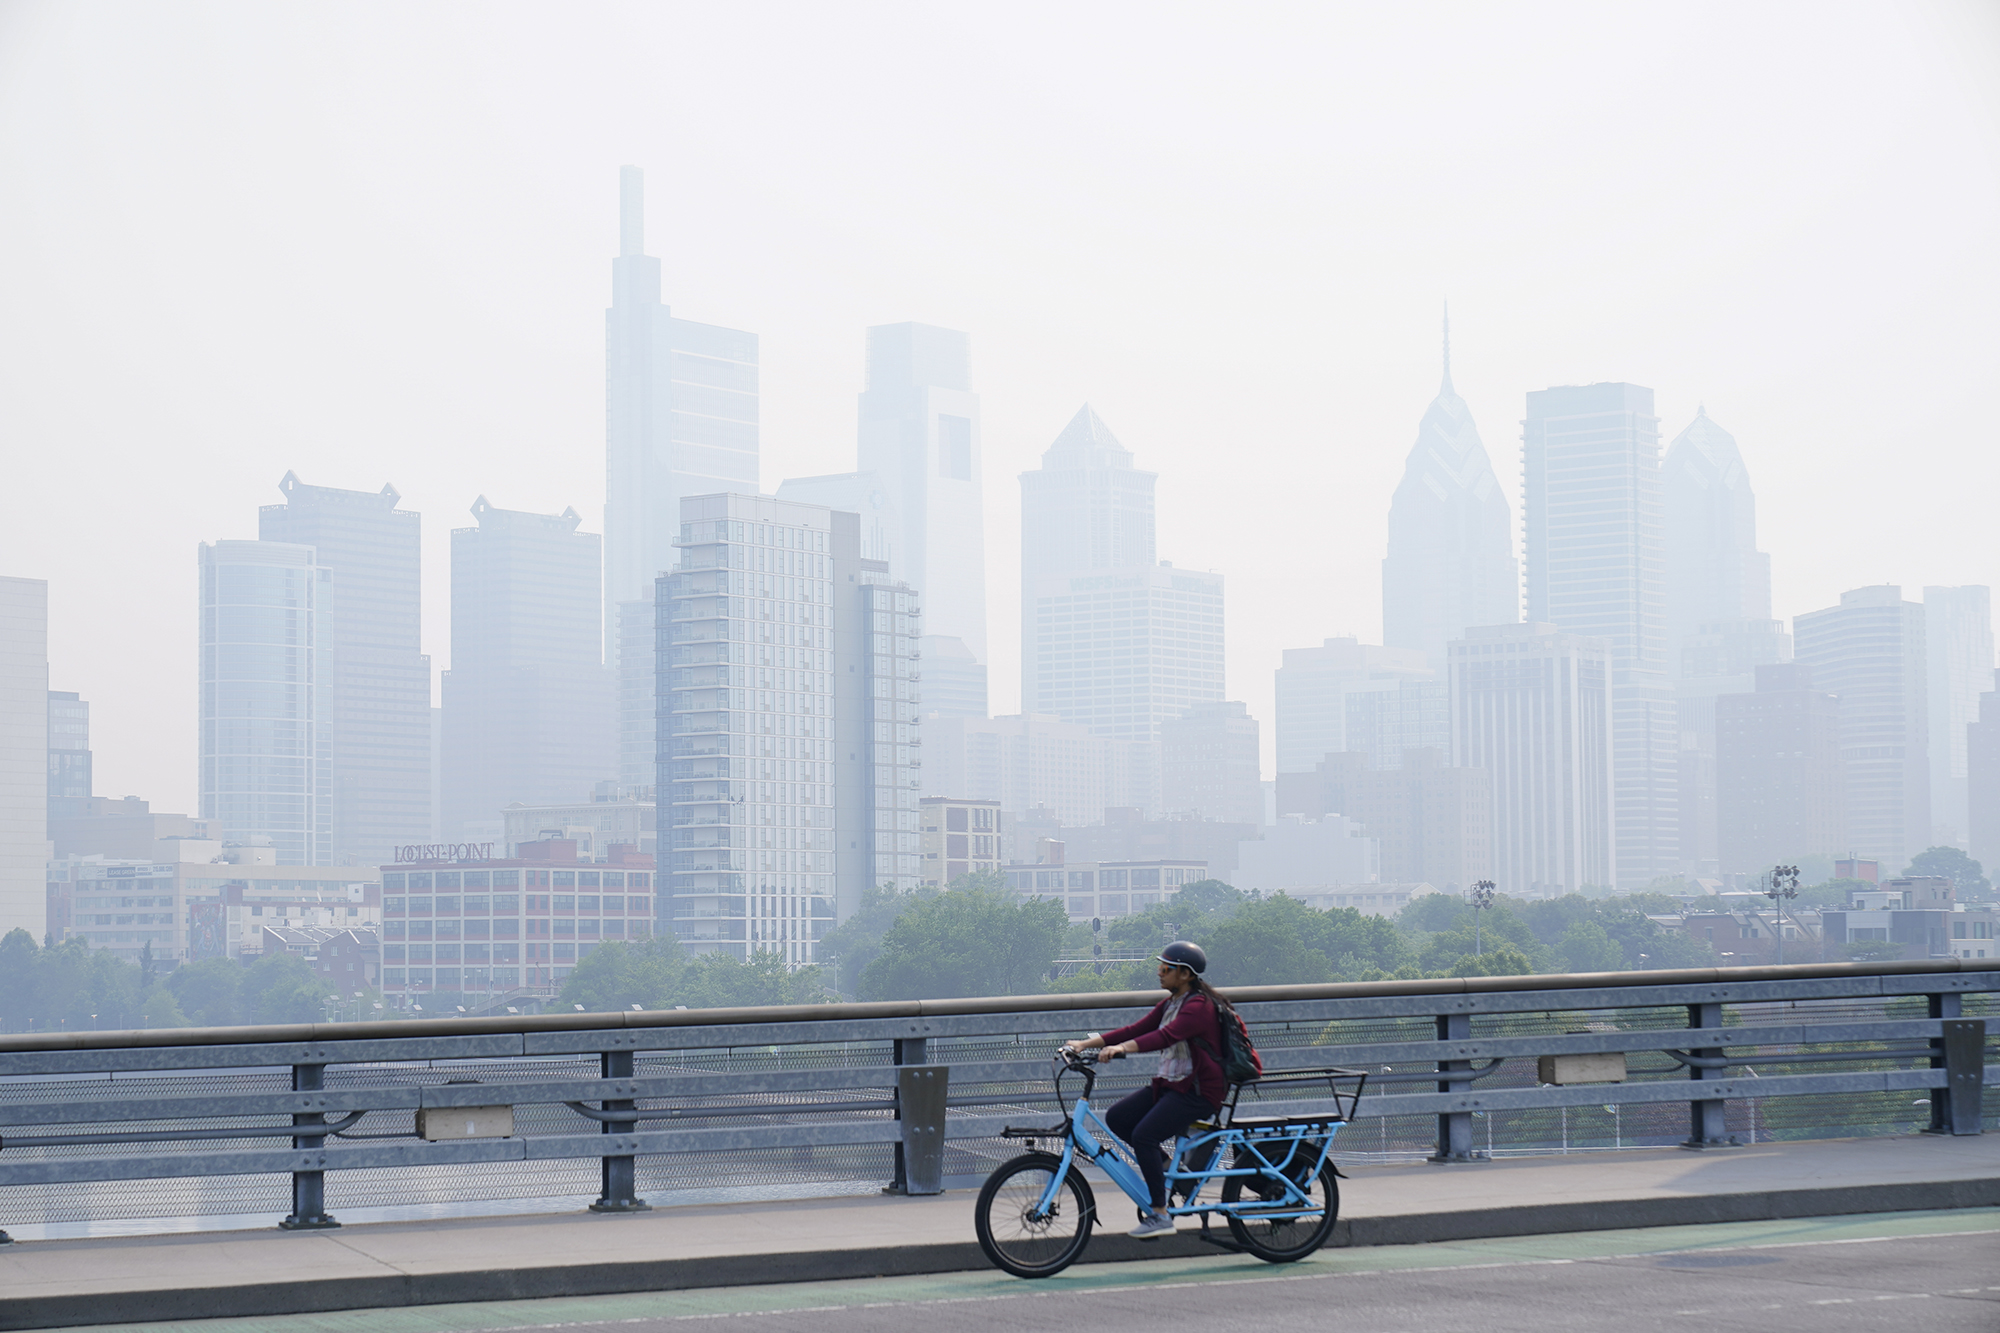 A person crosses the Schuylkill River on a blue bike. The city skyline behind him is obscured with smoke haze.